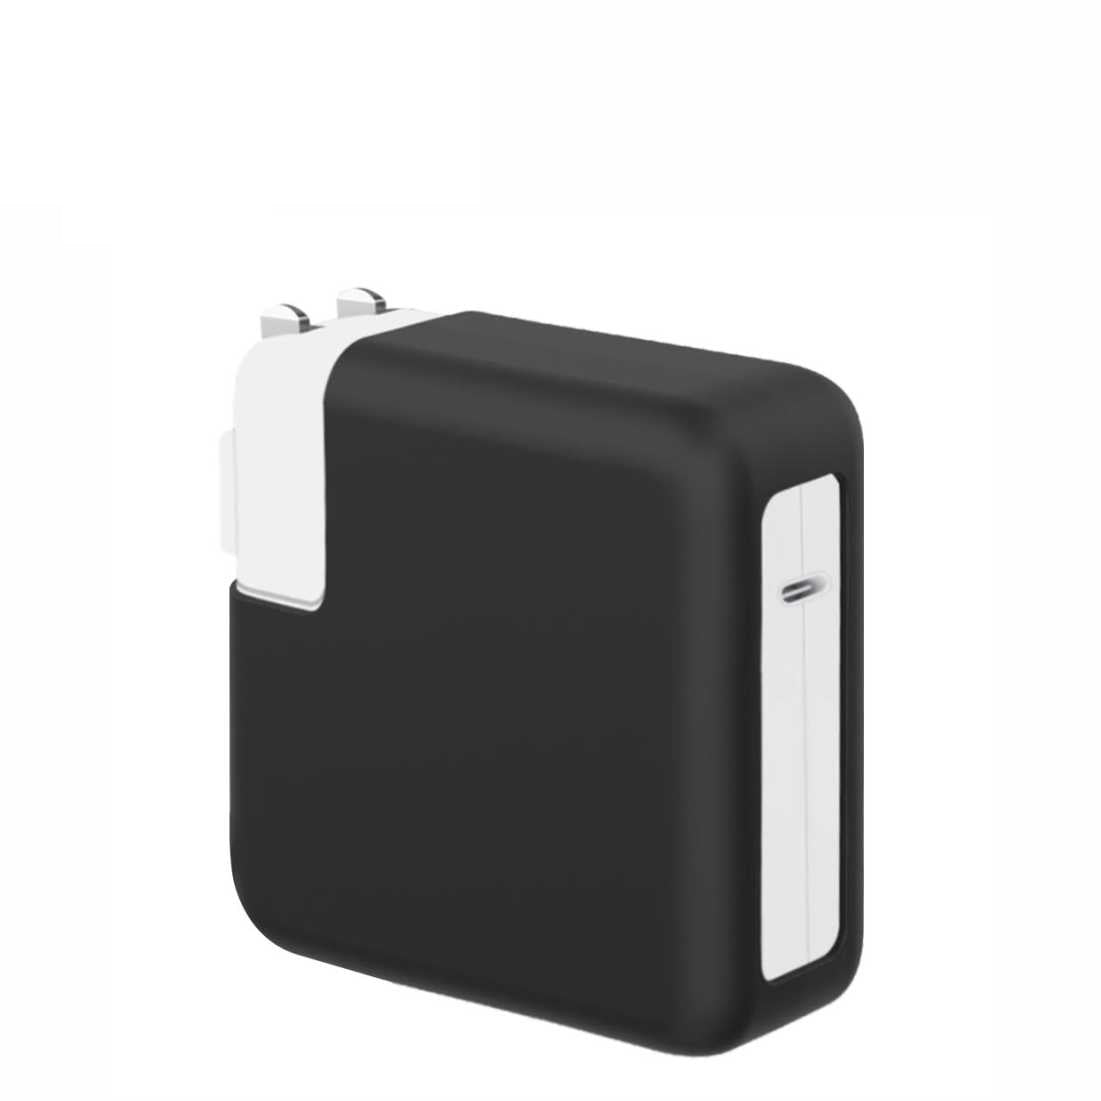 Silicon MacBook Charger Cover